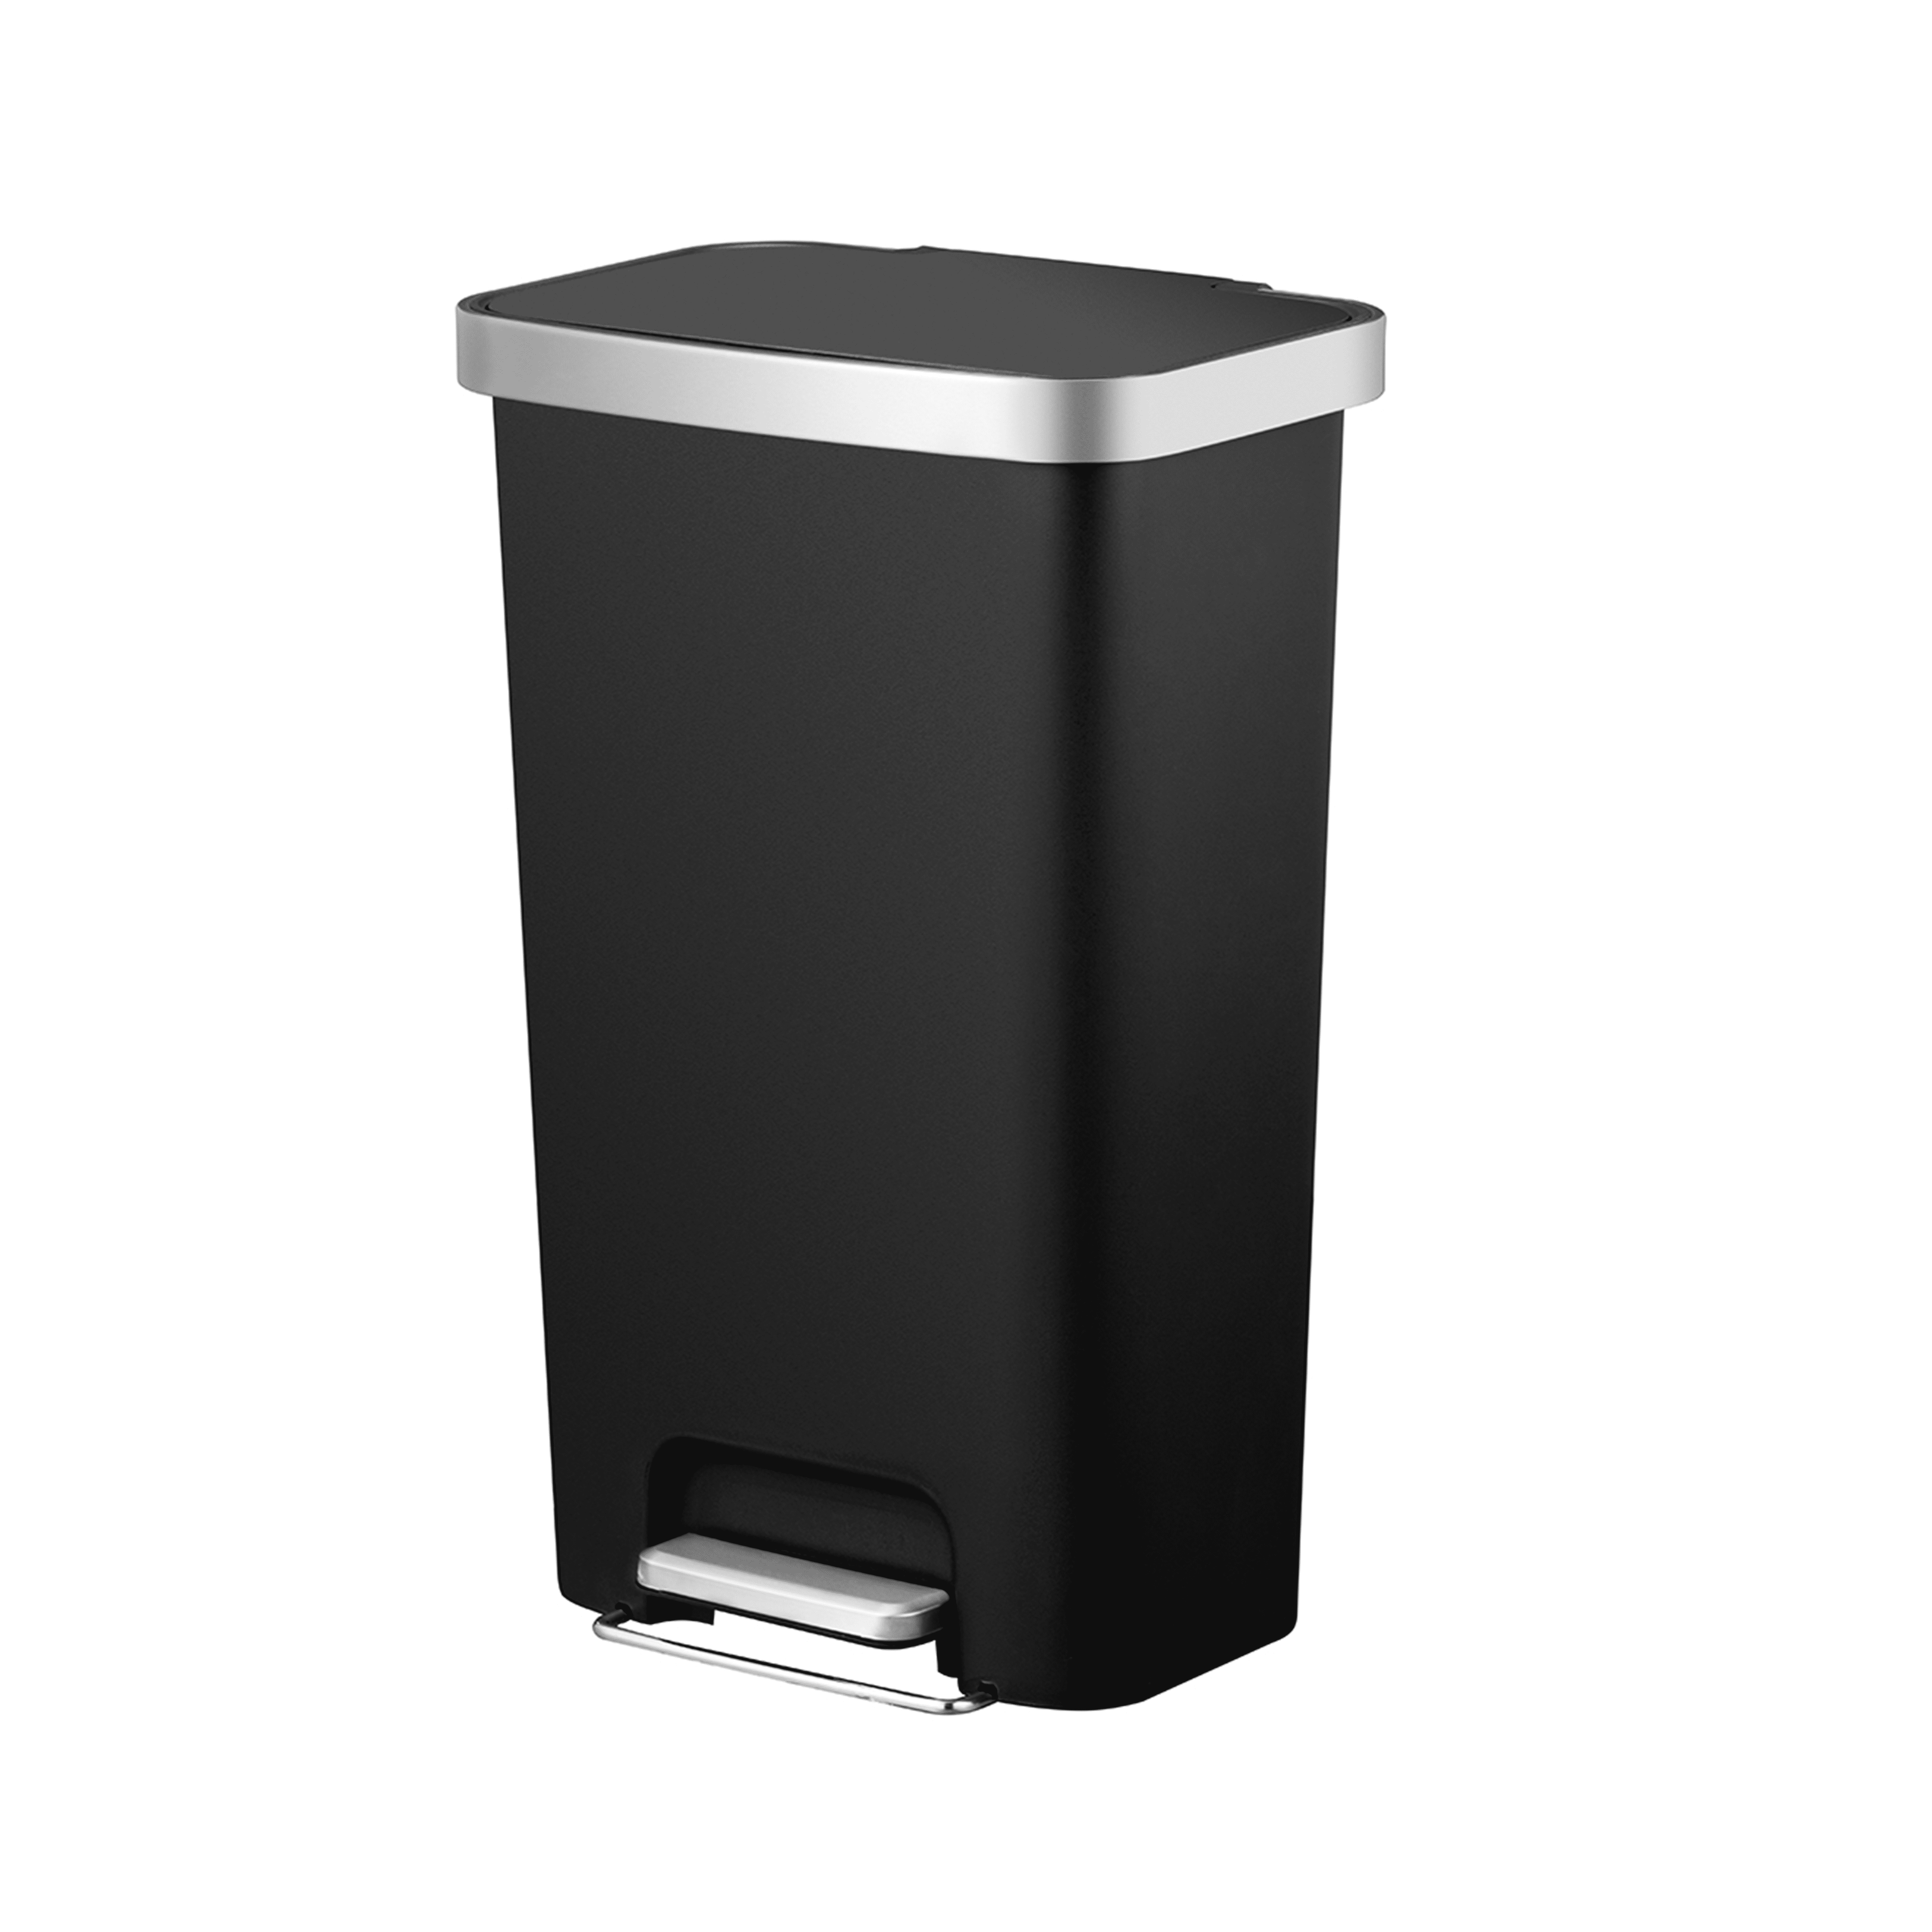 Better Homes & Gardens 7.9 Gallon Slim Trash Can, Stainless Steel Kitchen Step Trash Can